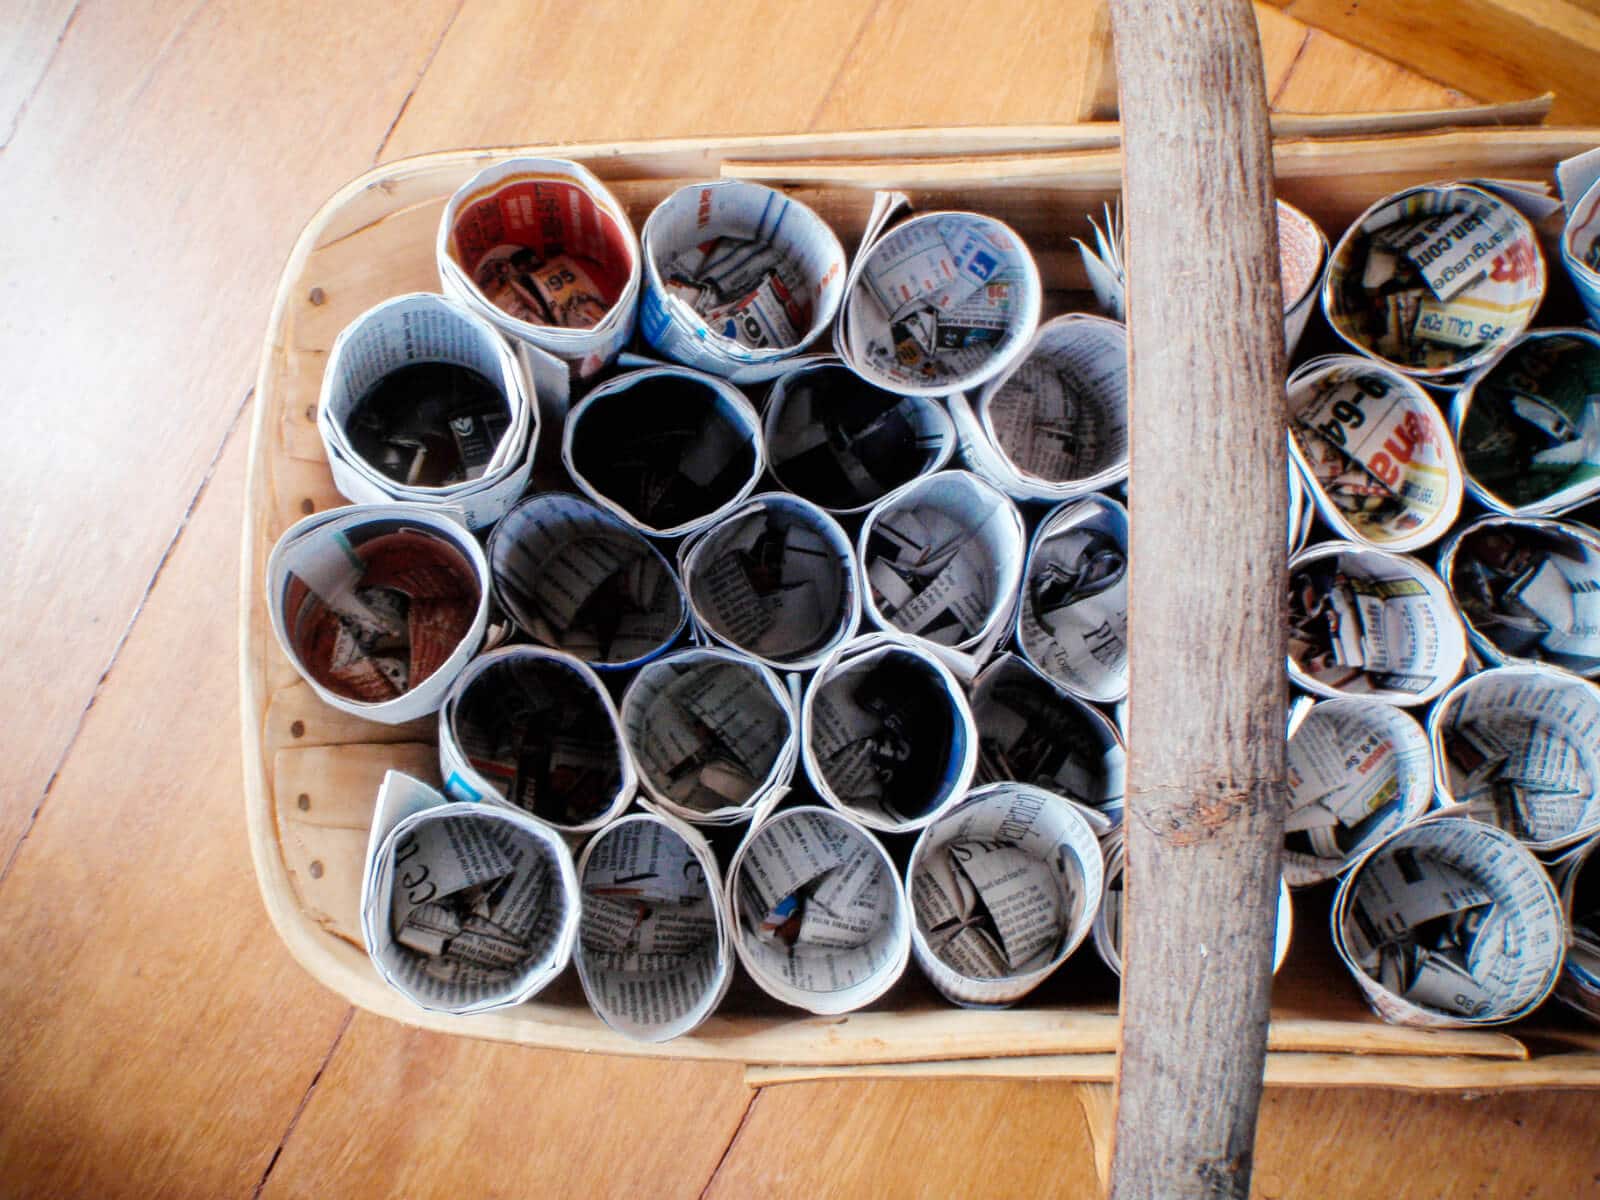 Newspaper seed starting pots are an easy DIY